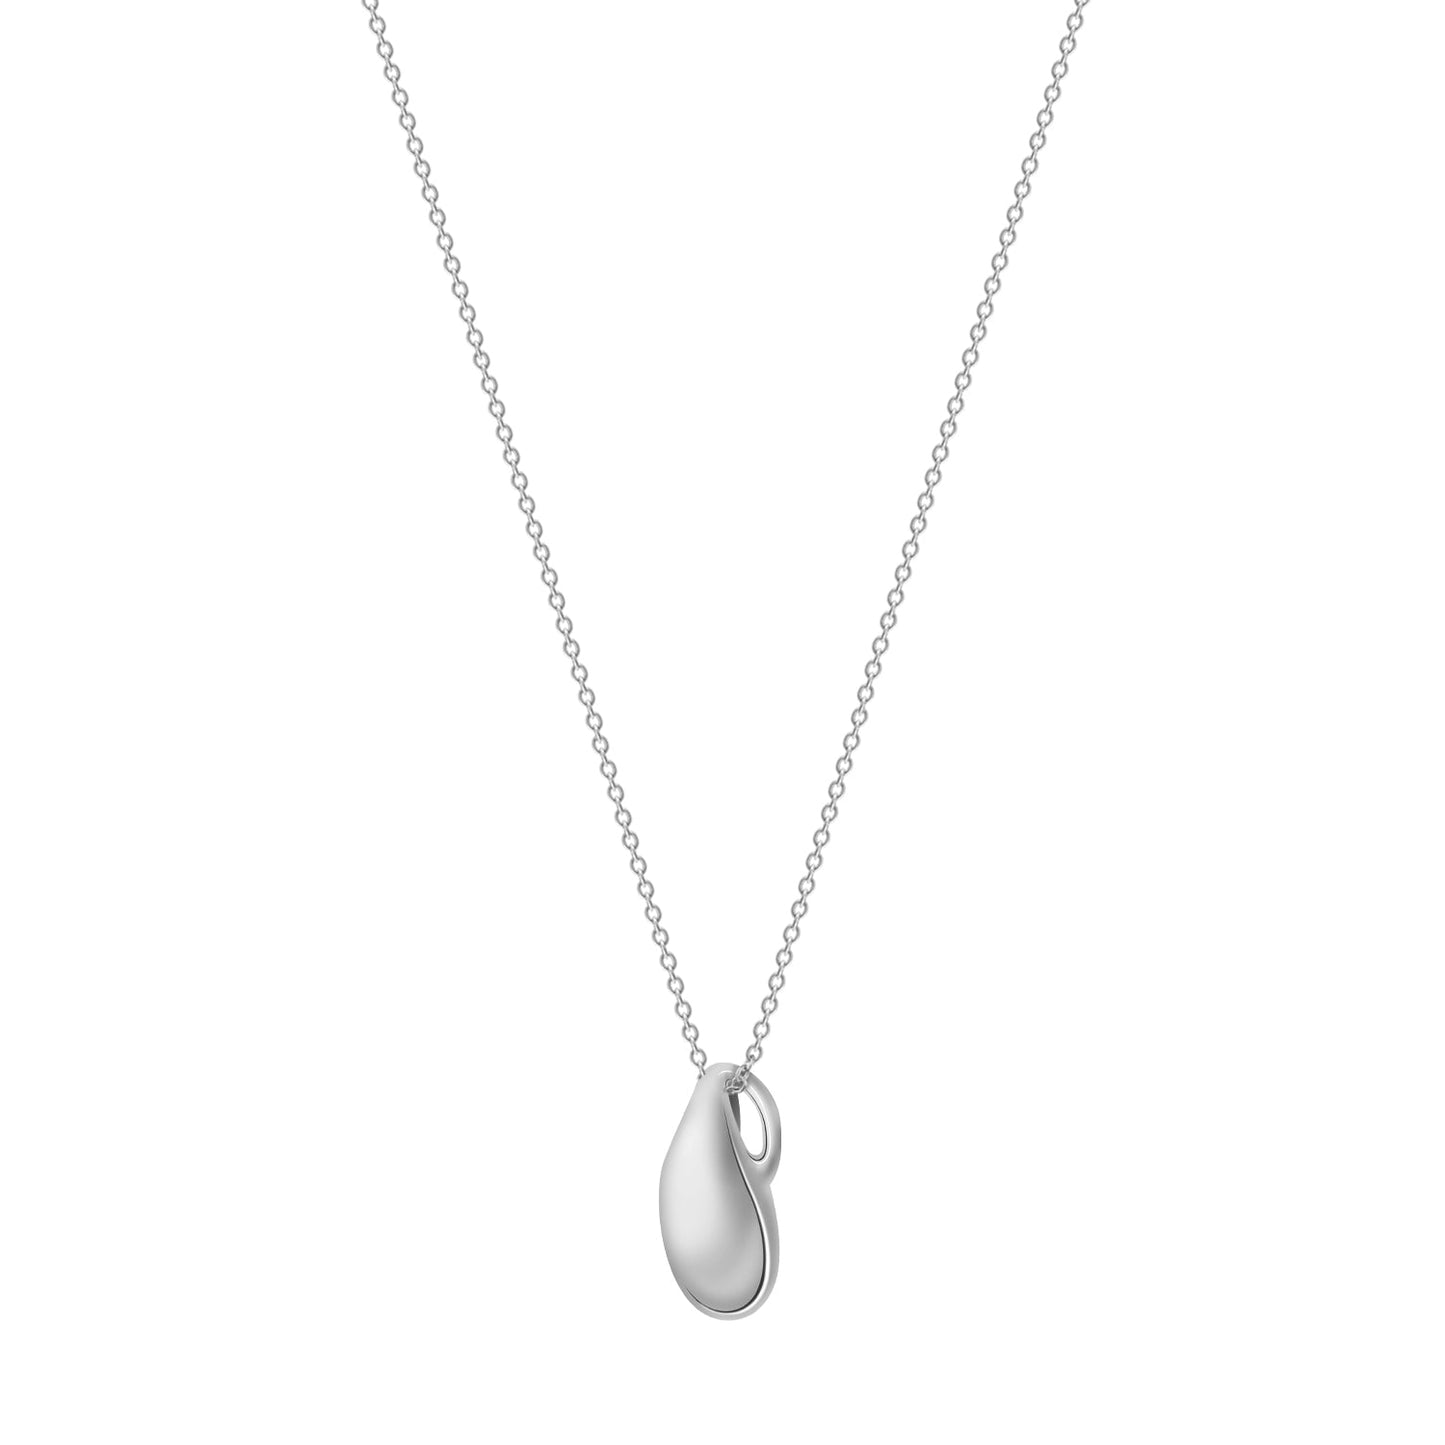 The Droplet Necklace